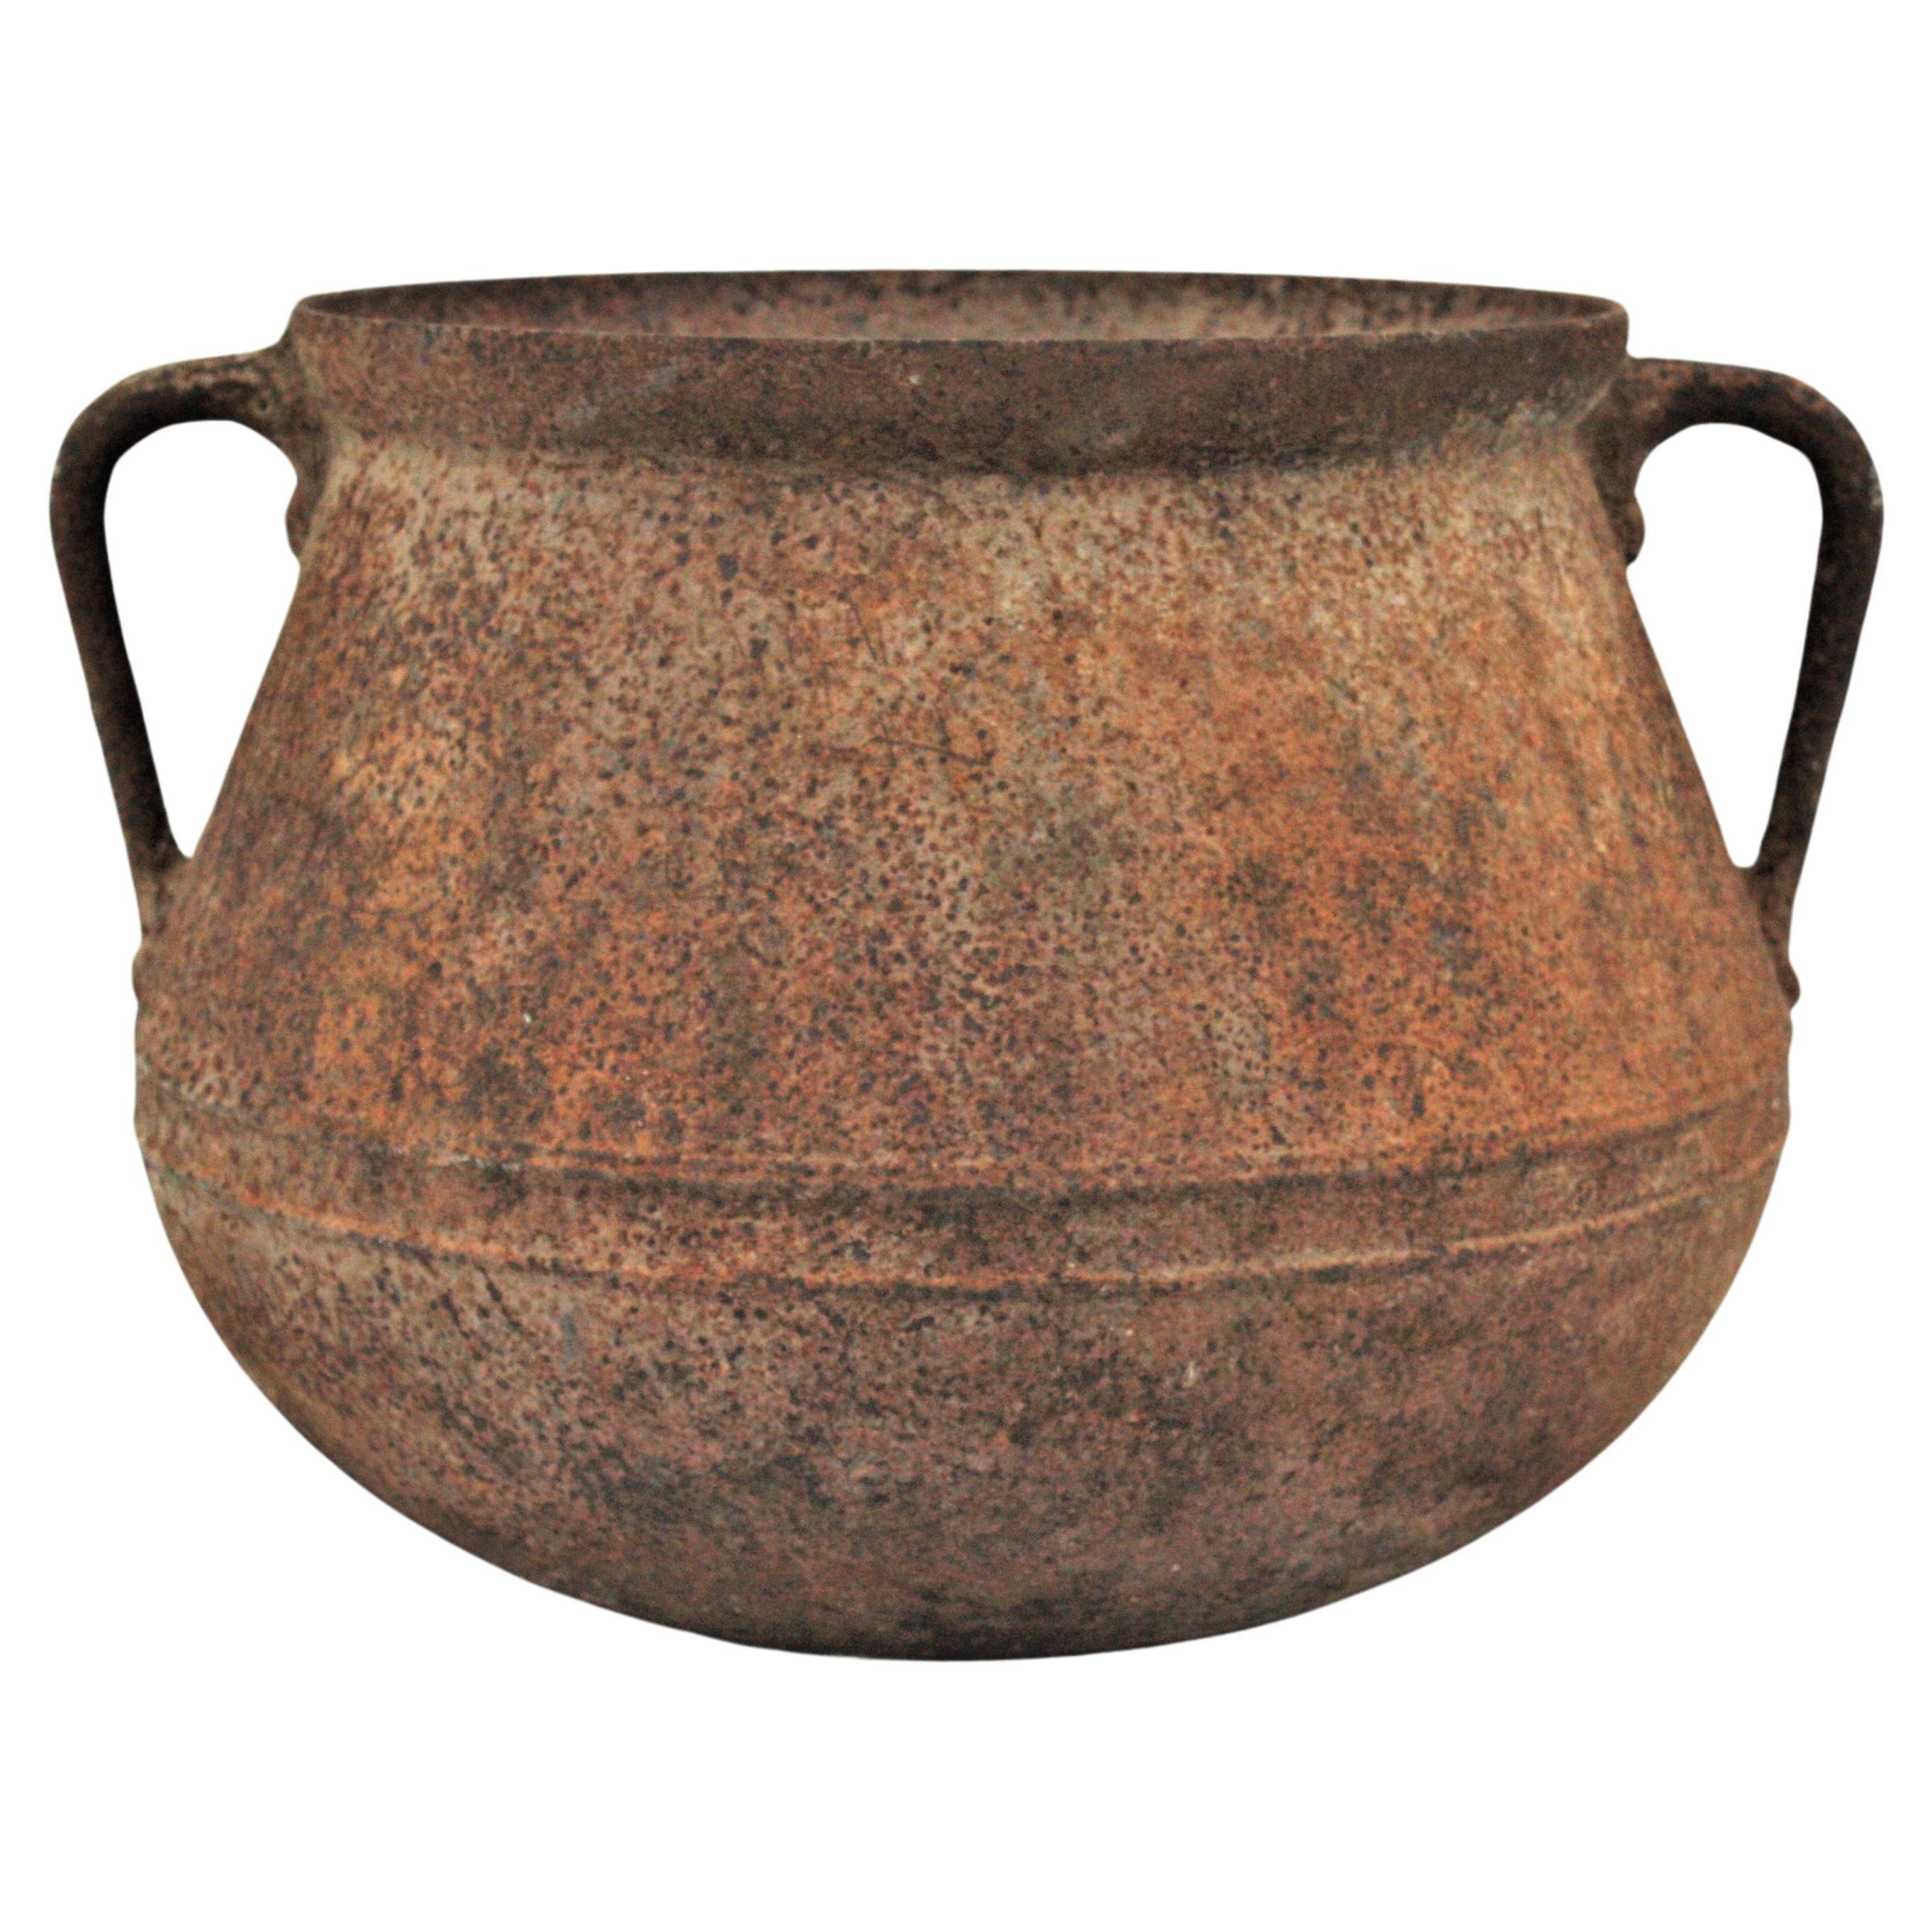 Spanish Rustic Iron Cauldron Pot or Vessel with Rusty Original Patina For Sale